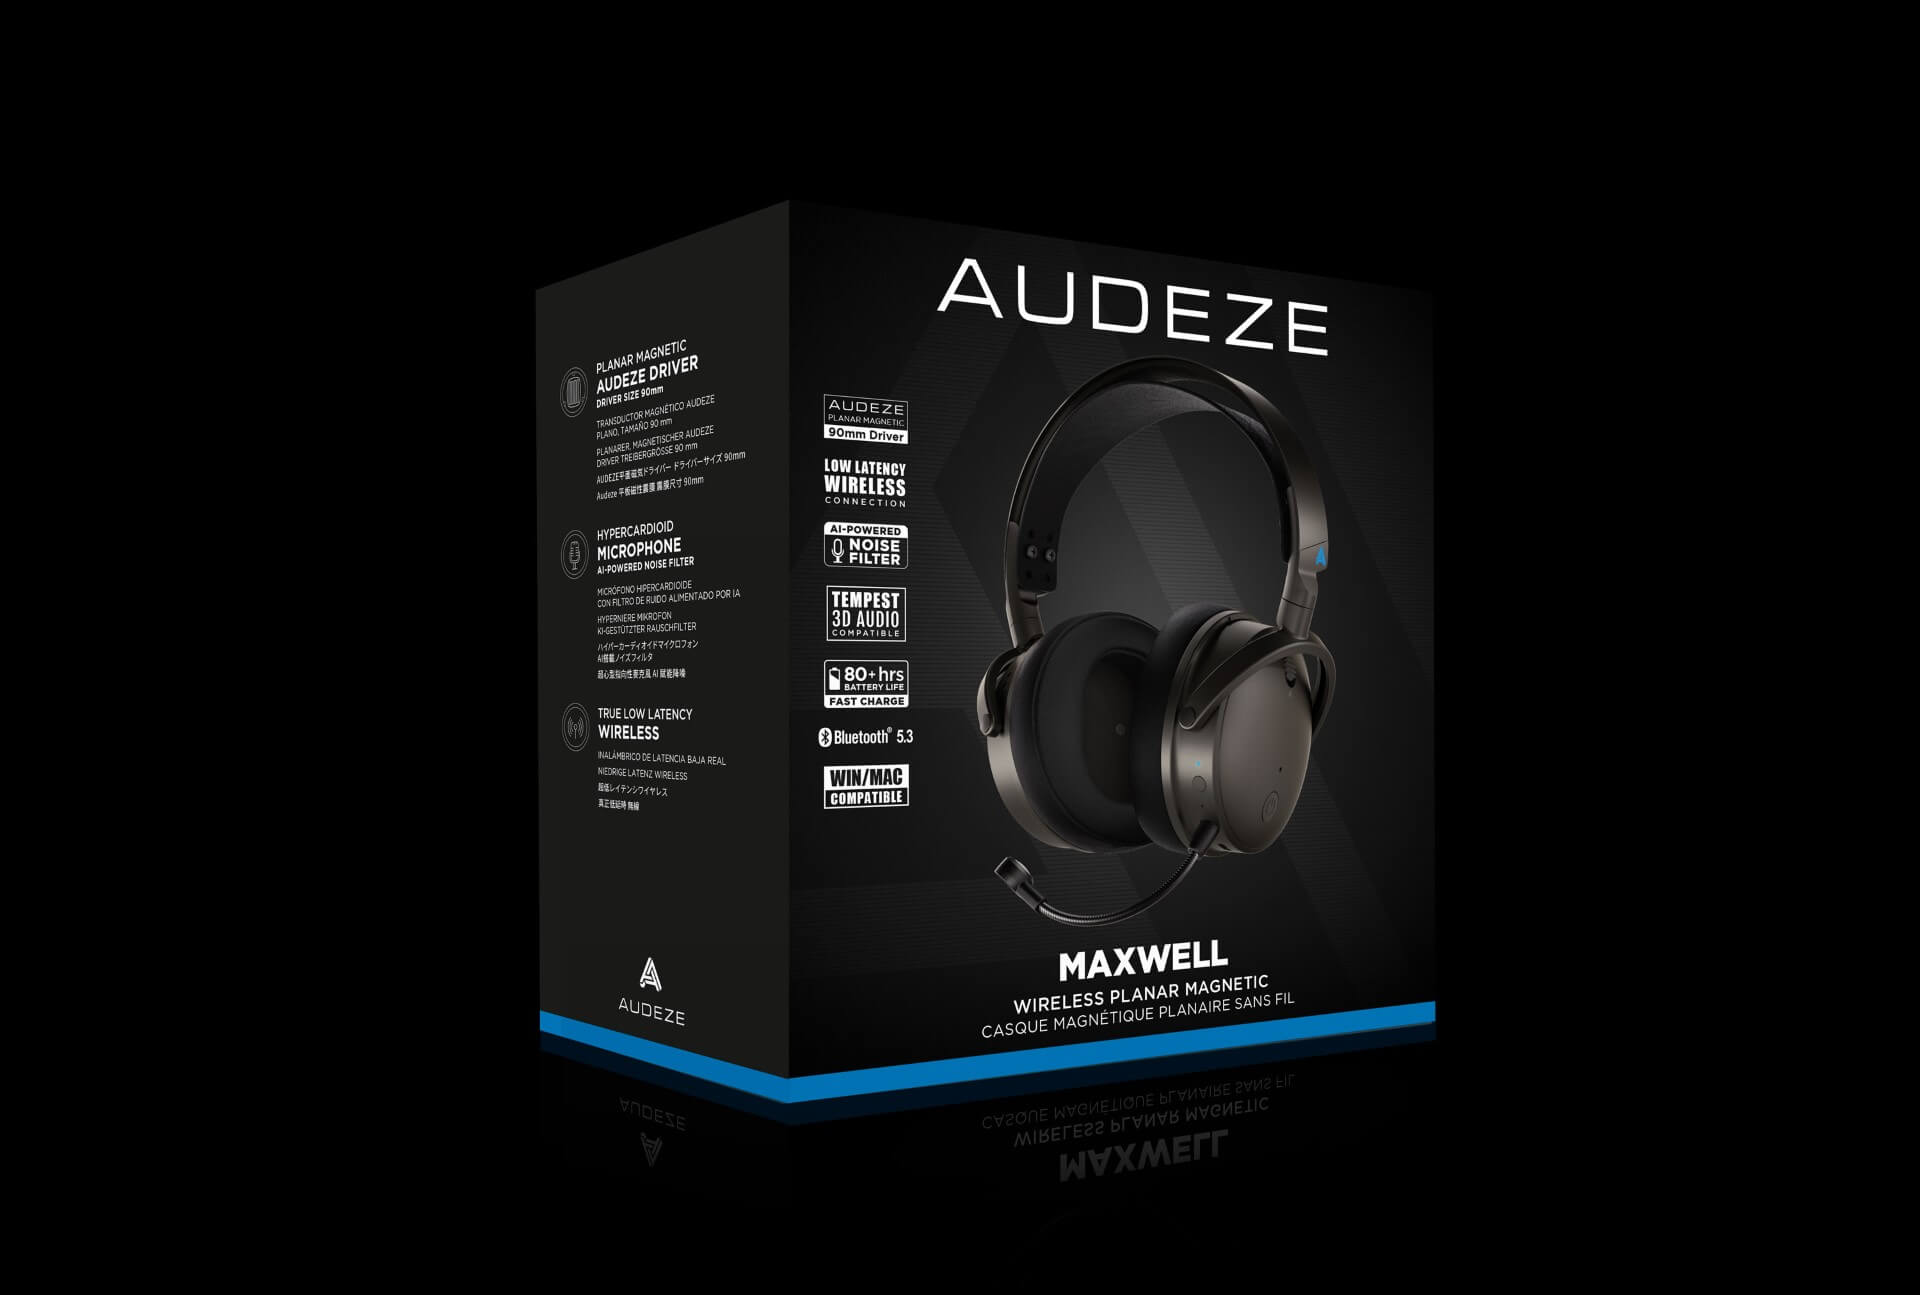 MAXWELL-PLAY Casque Gamer pour Playstation AUDEZE